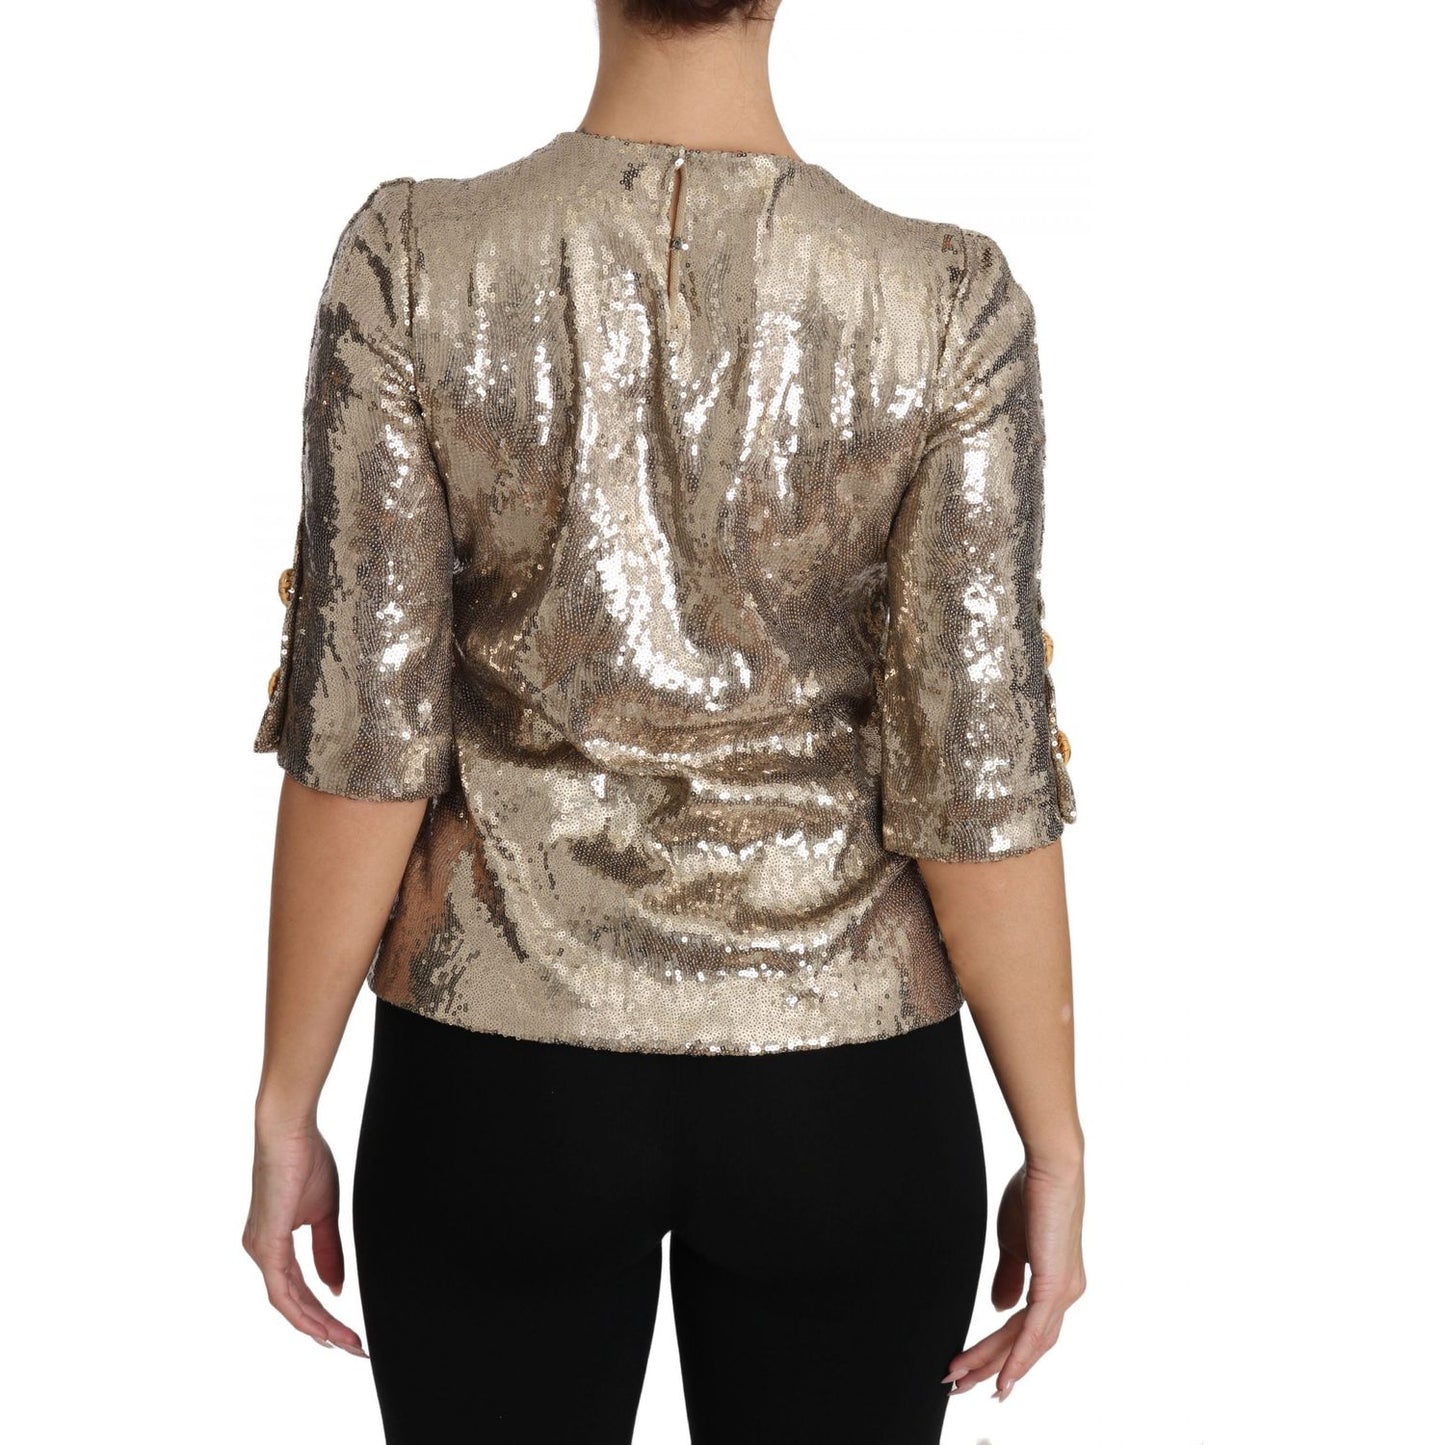 Dolce & Gabbana Gold Parrot Motif Crewneck Blouse with Crystals gold-sequined-parrot-crystal-blouse 654059-gold-sequined-parrot-crystal-blouse-1.jpg